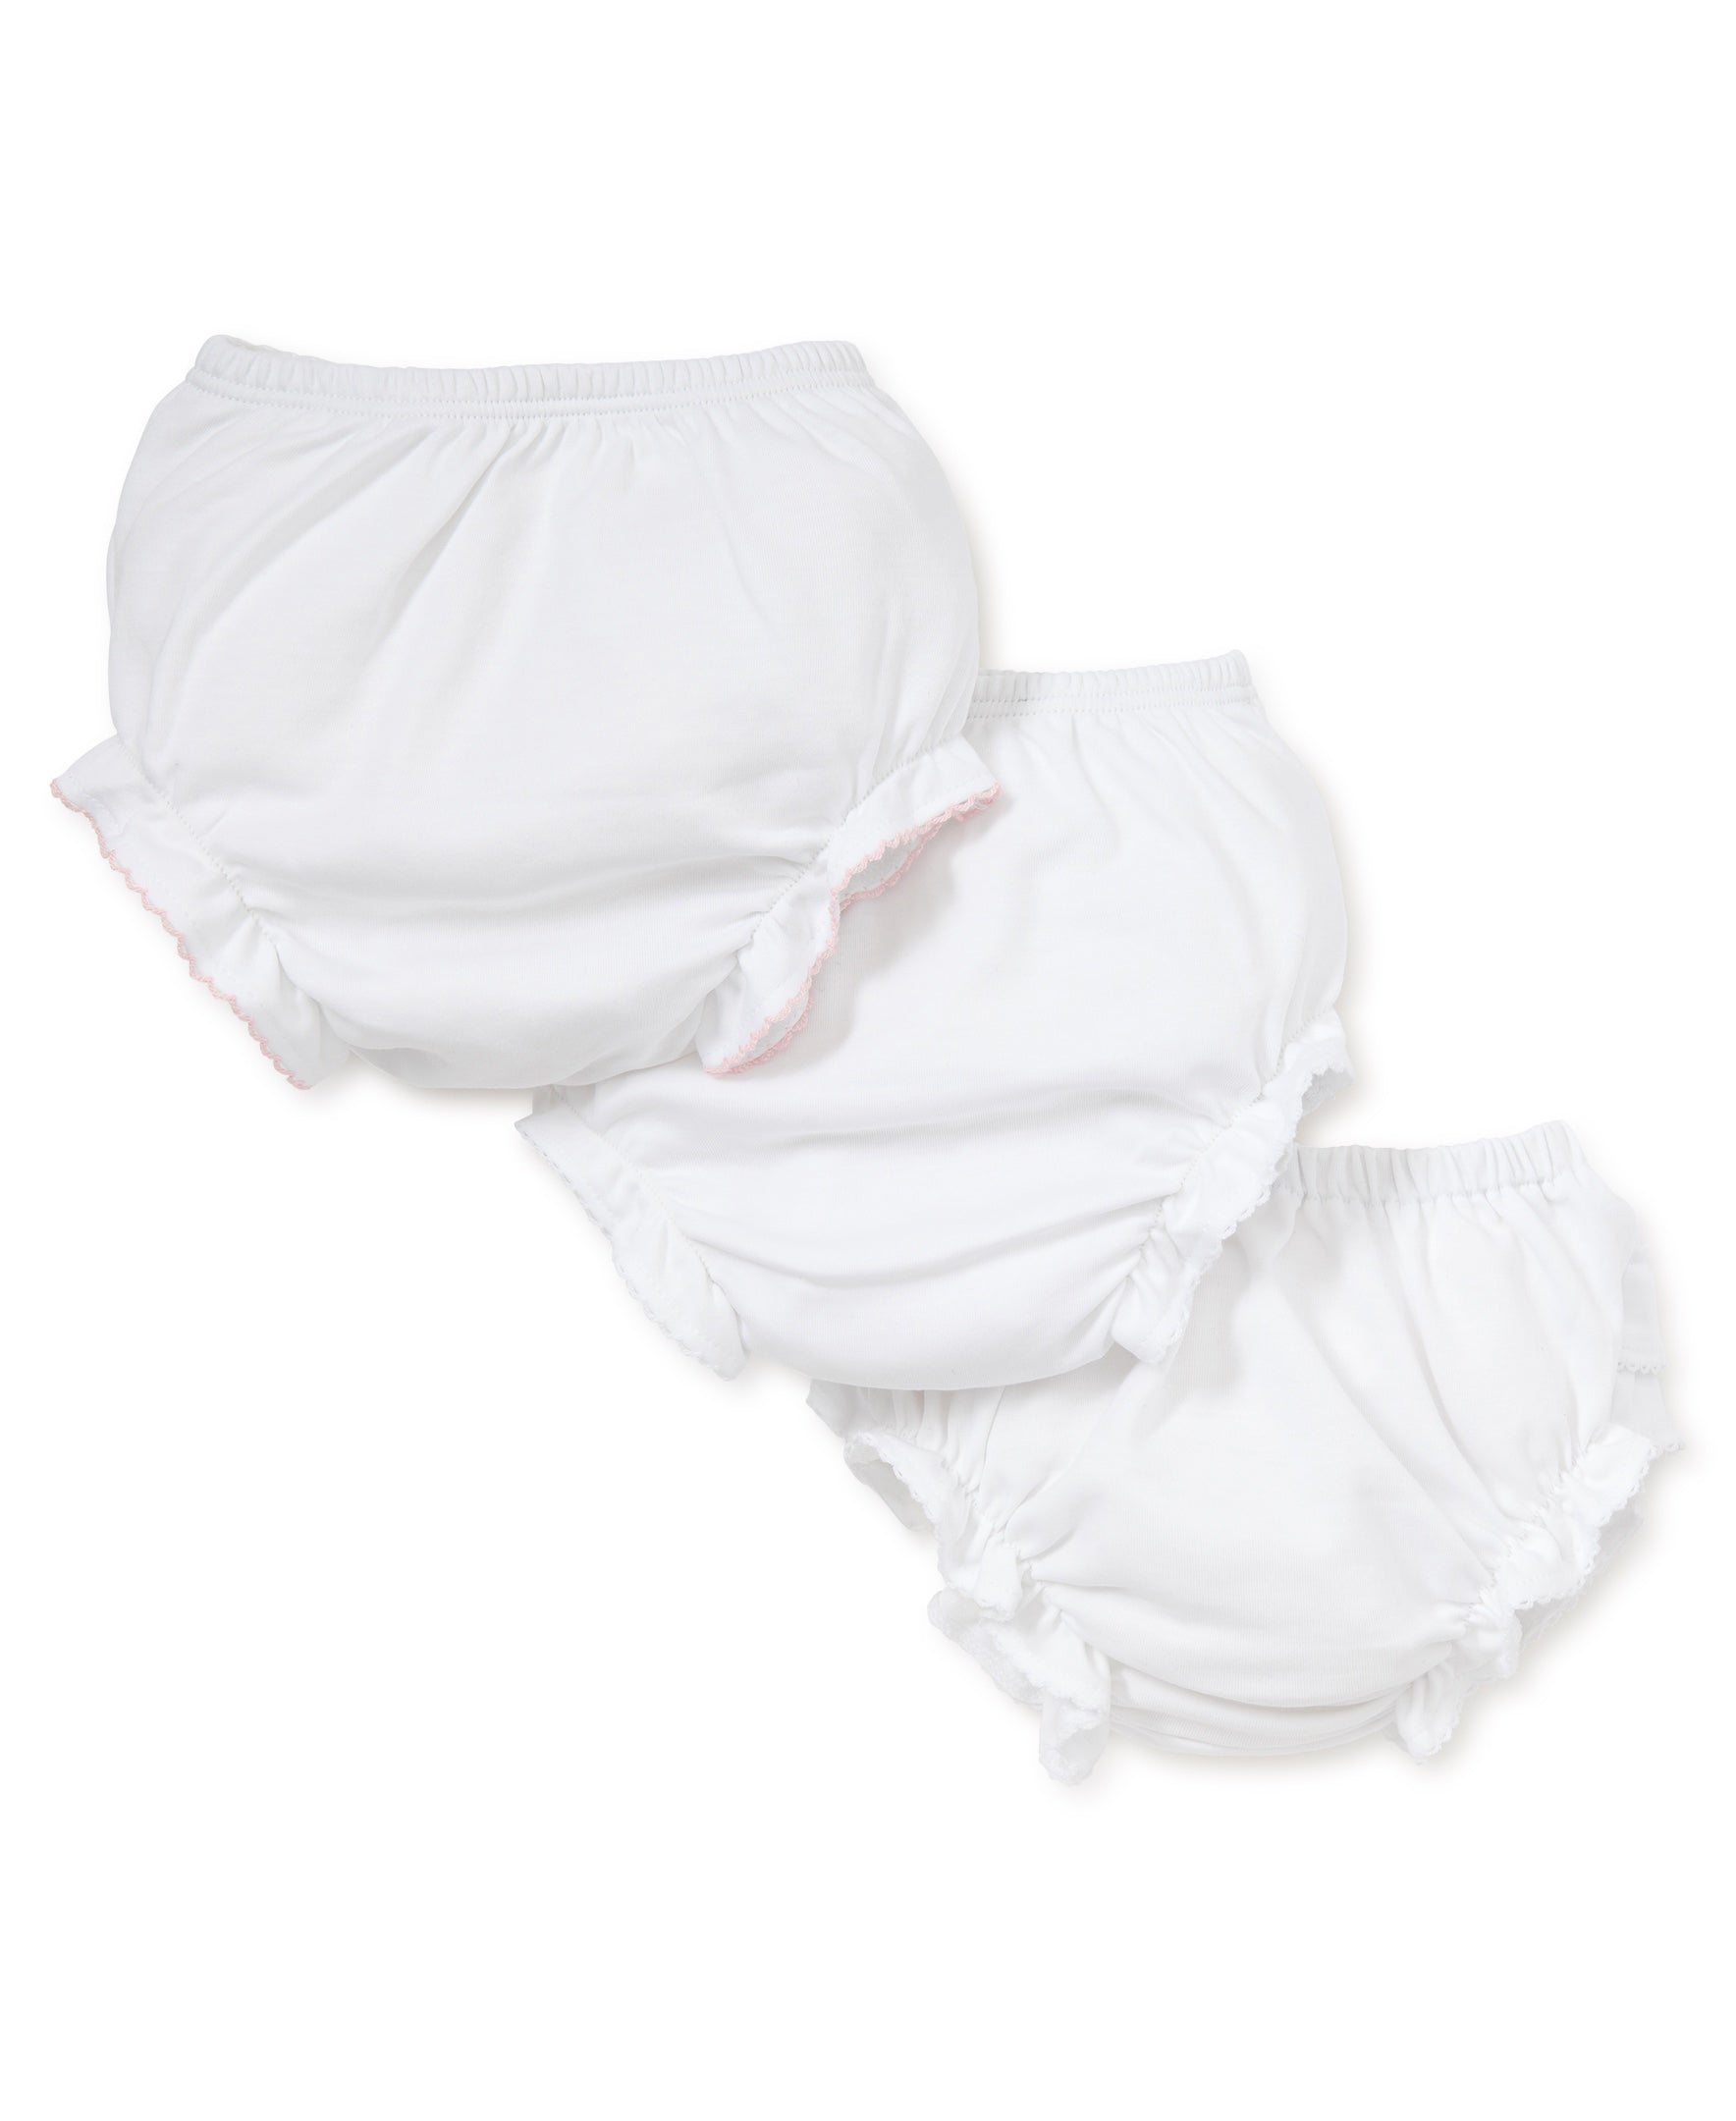  5 Pack Ruffle Diaper Cover - Baby Bloomers, Cute